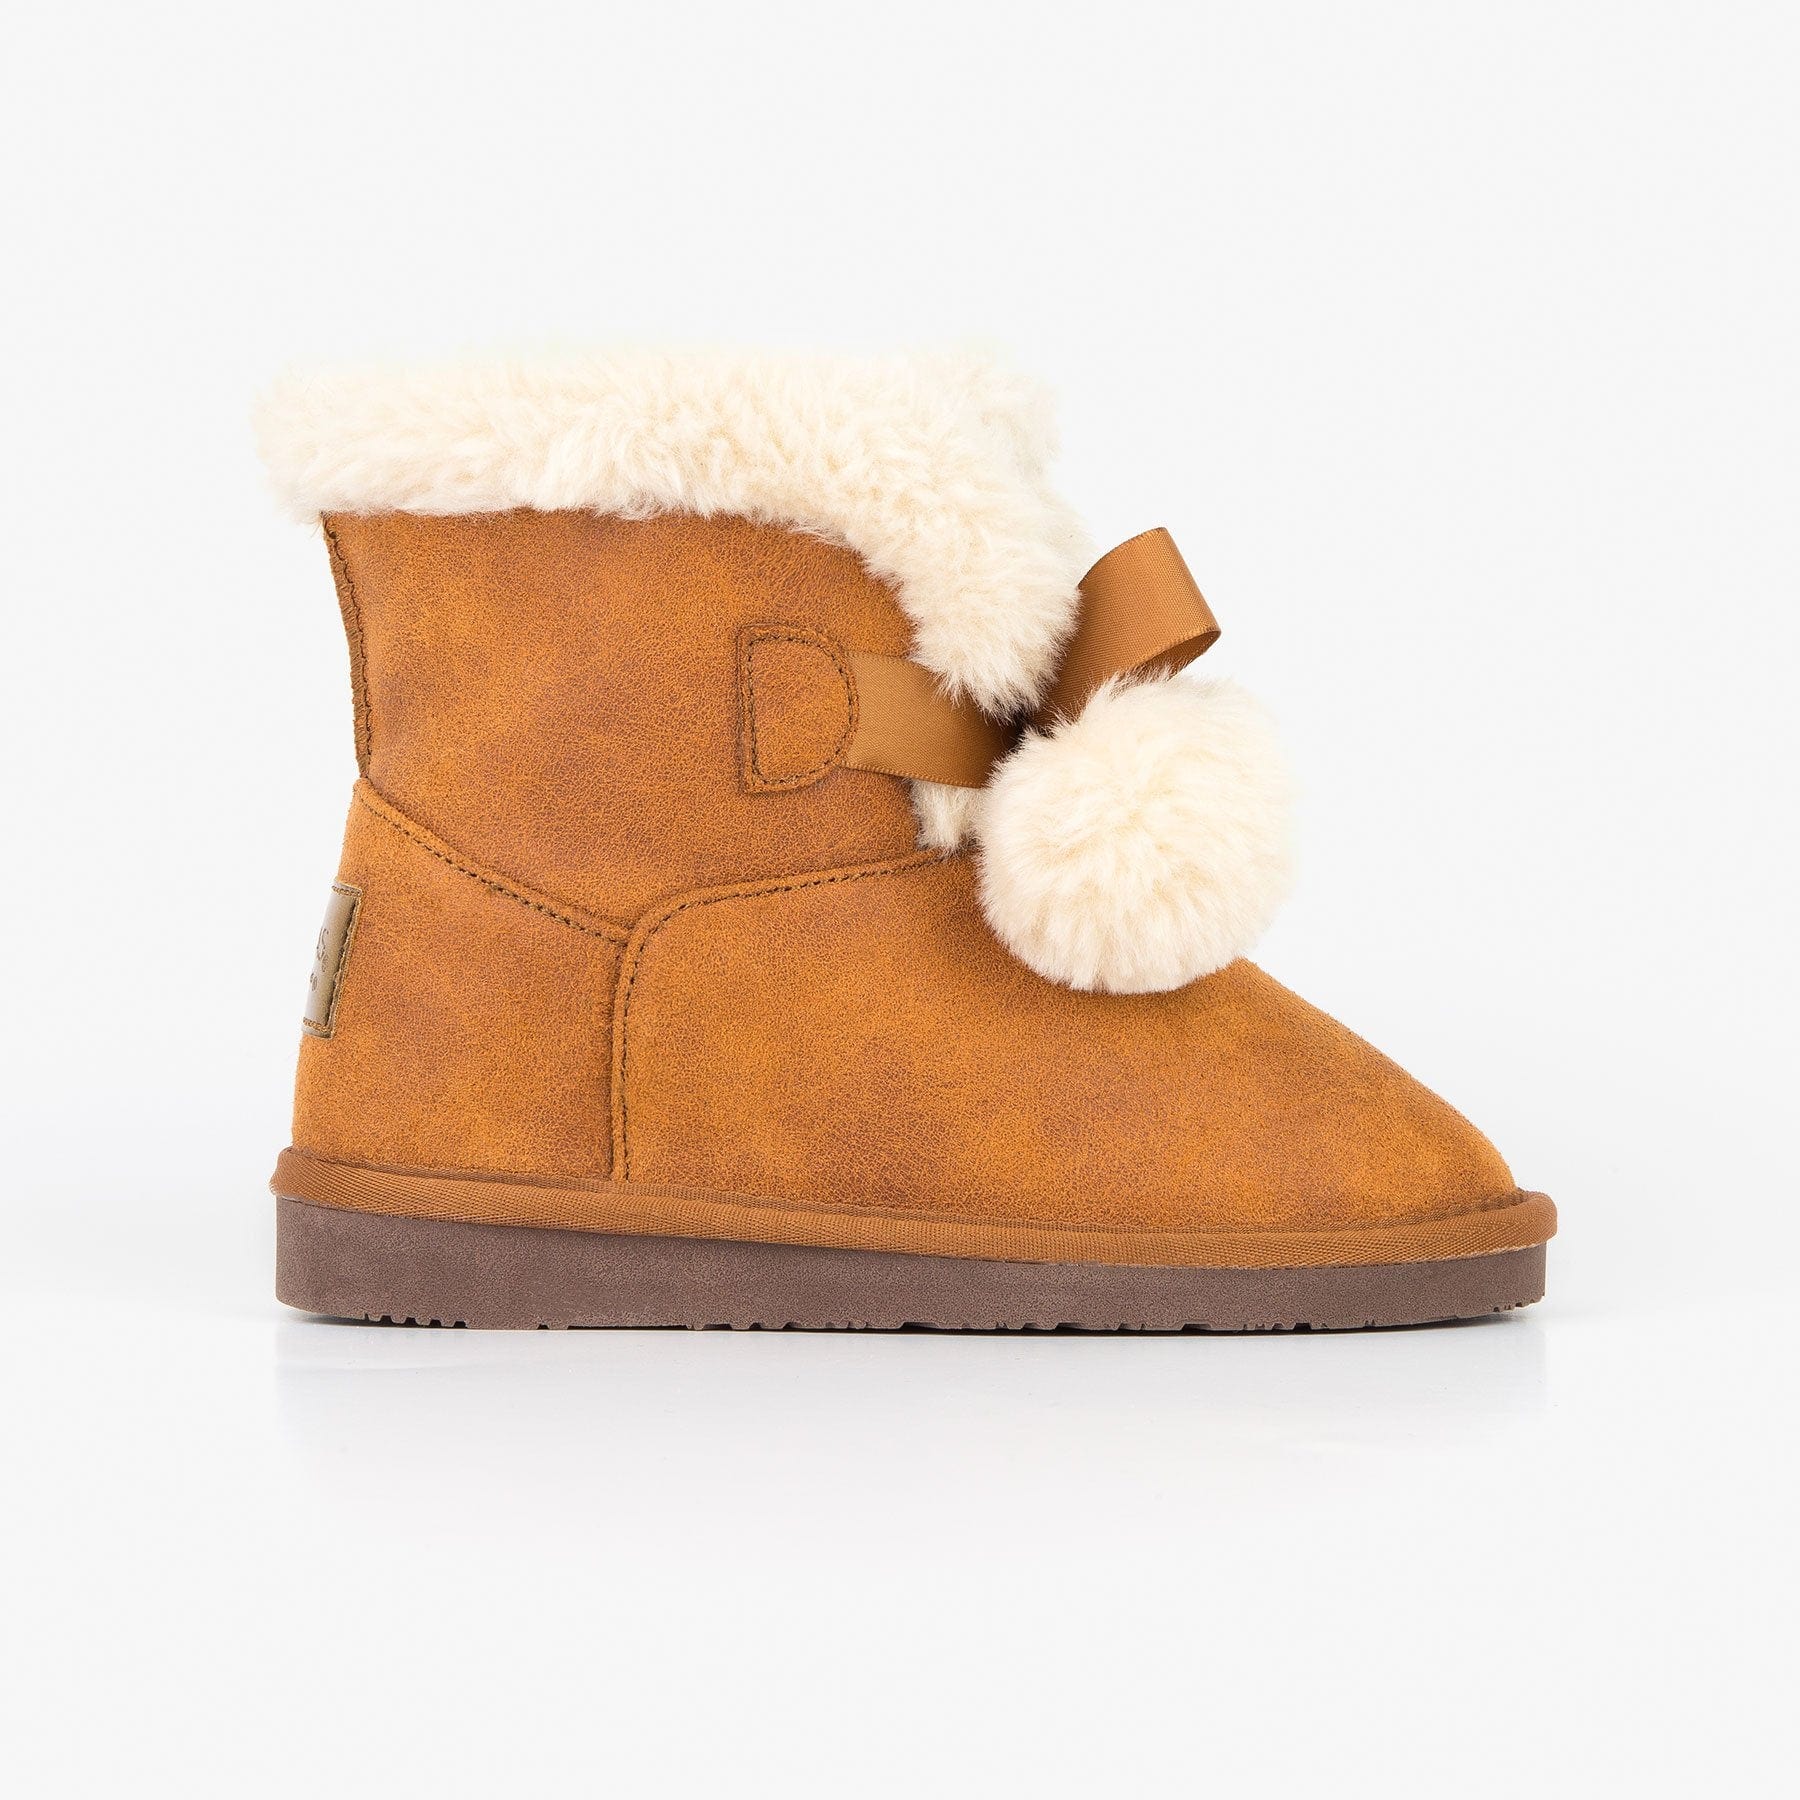 FRESAS CON NATA Shoes Girl's Camel Australian Boots with Pompoms